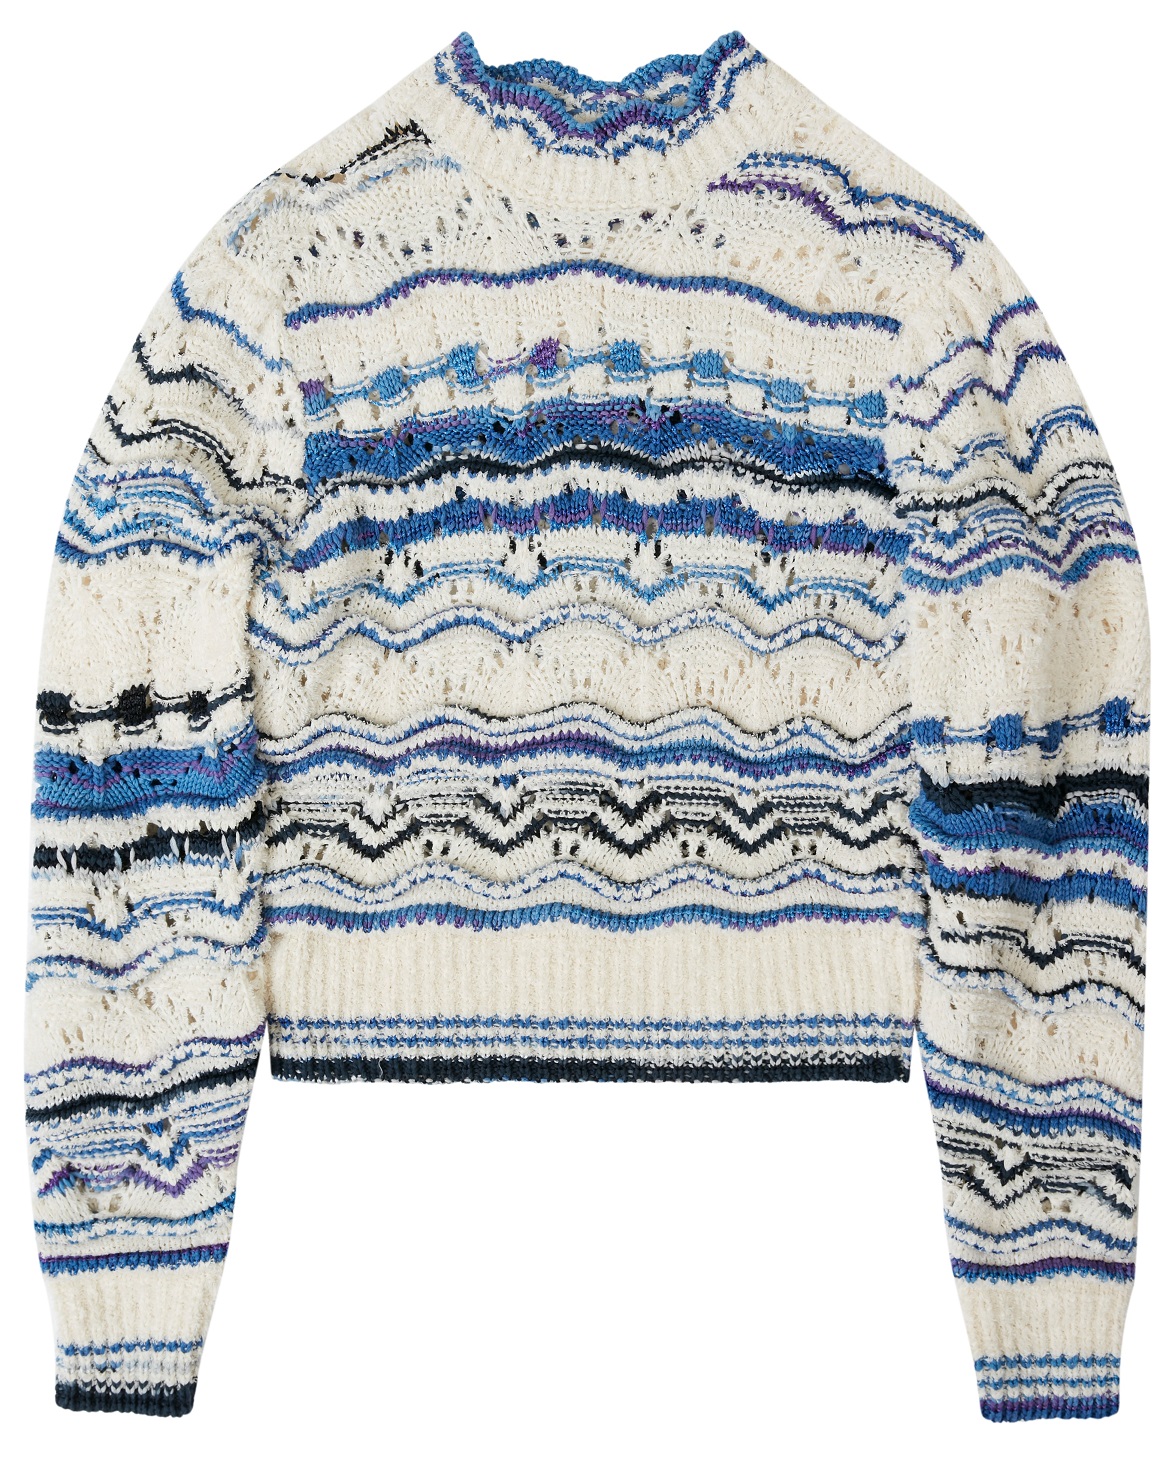 Isabel Marant Étoile Ambre Knit Pullover in Electric Blue